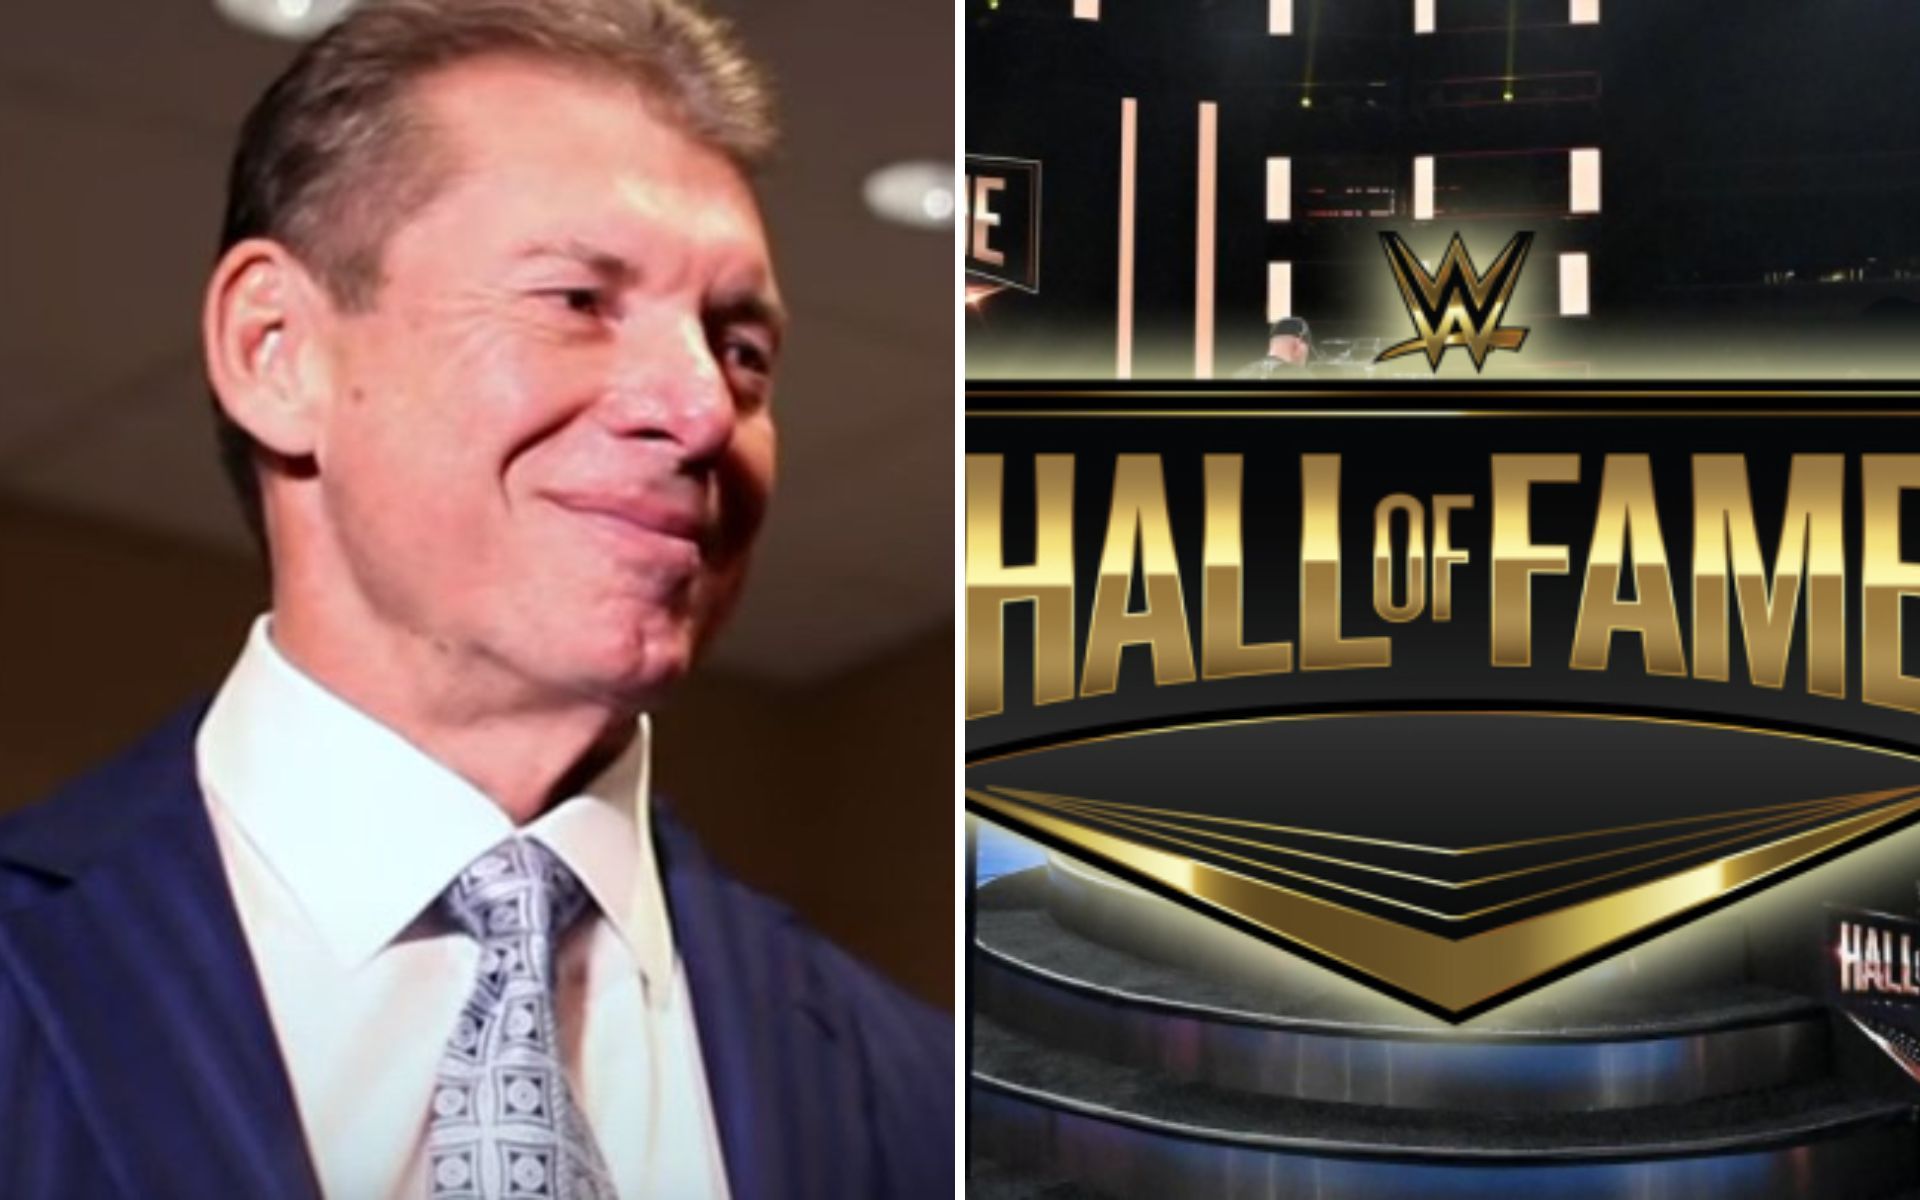 Vince McMahon made a big request to the WWE Hall of Famer